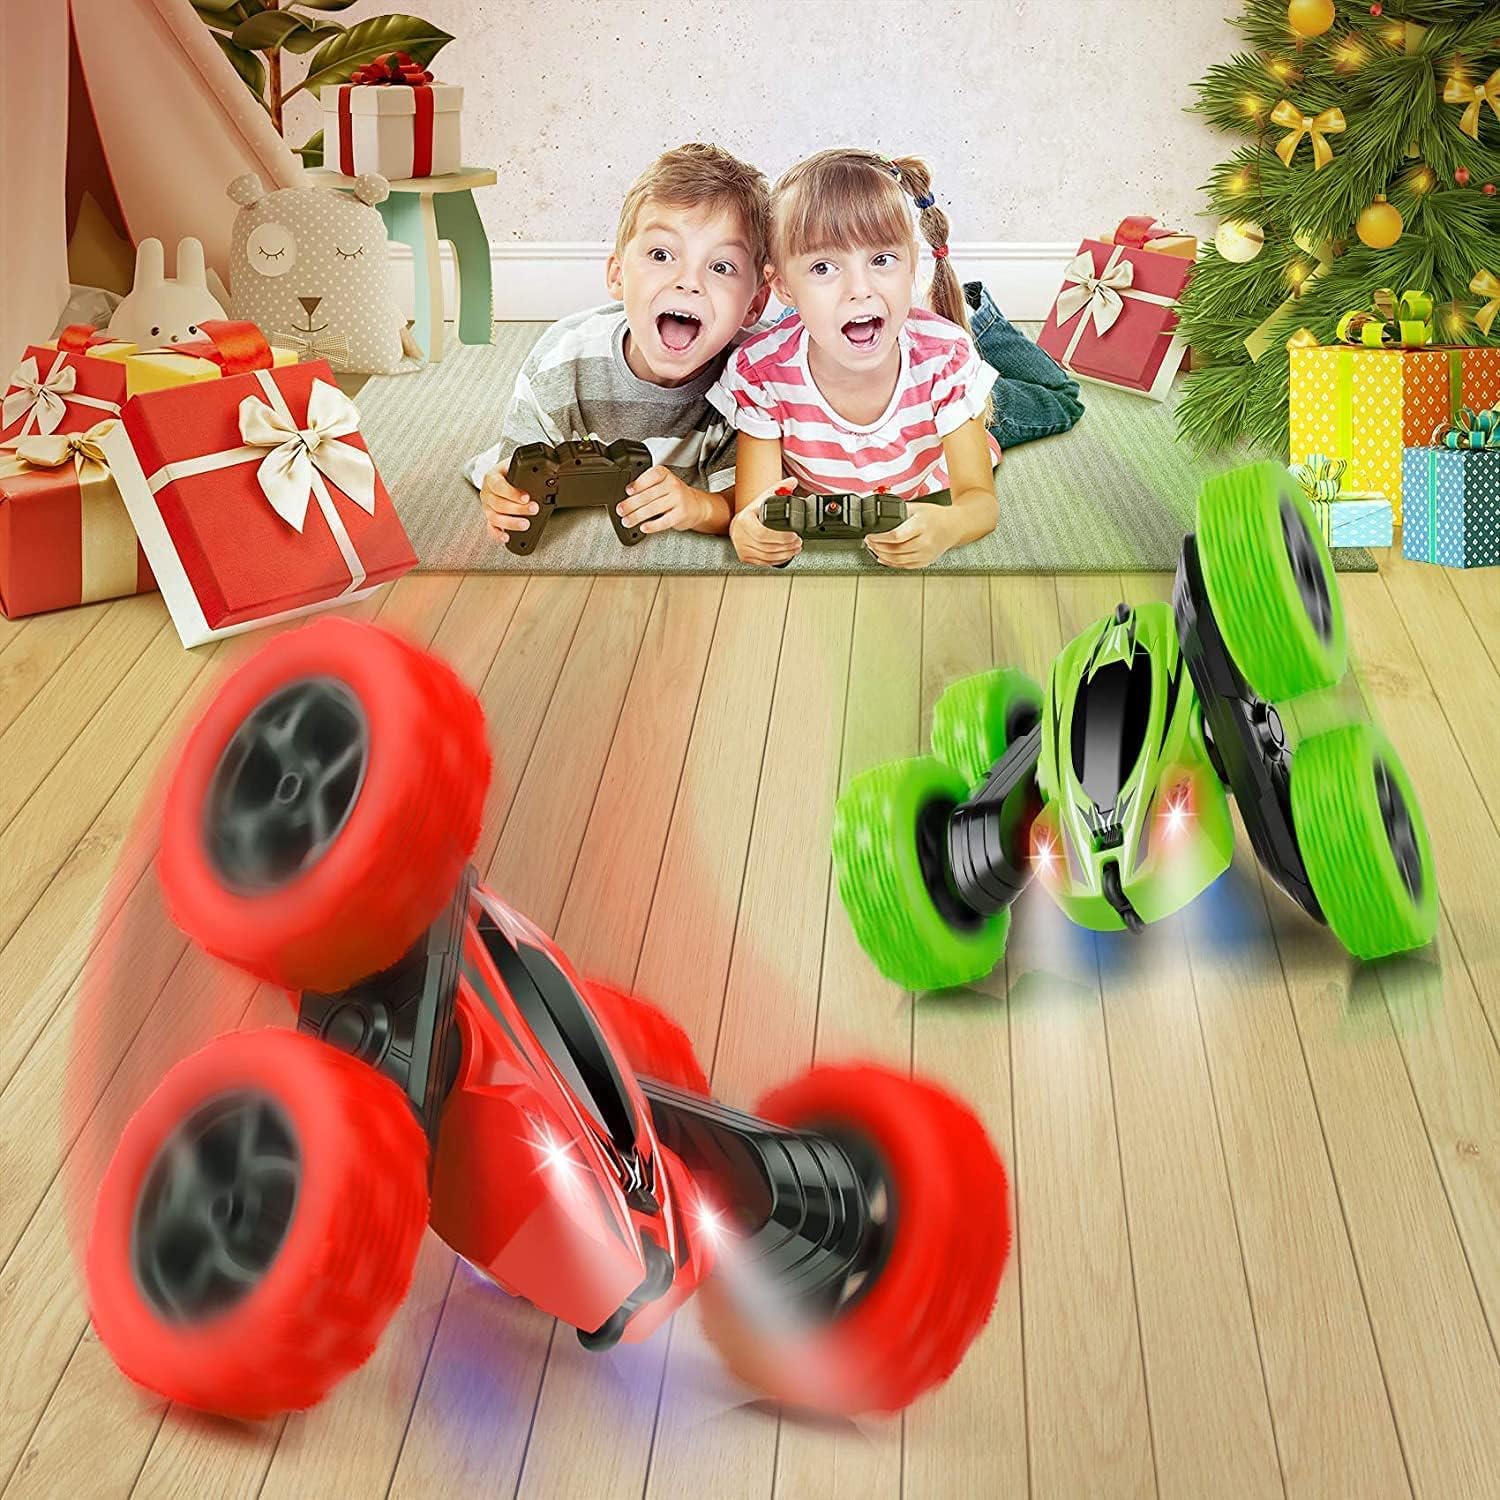 Arabest RC Cars Stunt Car Toy, 4WD 2.4Ghz Double Sided 360° Rotating RC Car with Headlights, Kids Toy Cars for Boys/Girls (Red)